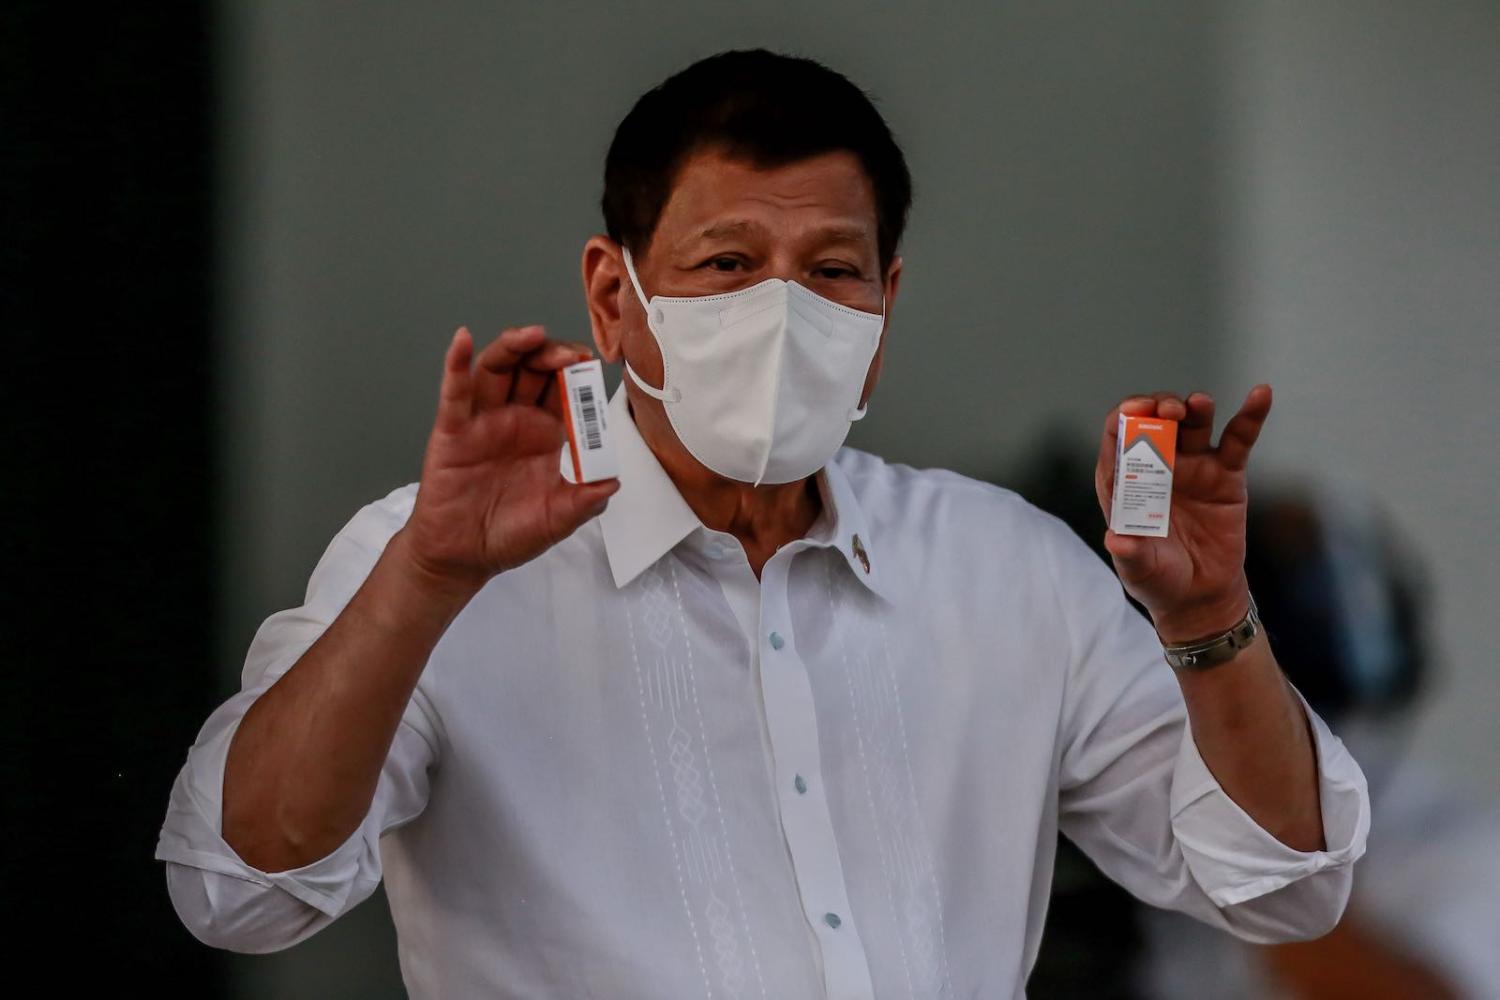 Philippine President Rodrigo Duterte shows boxes of newly arrived Sinovac Covid-19 vaccines purchased from China, 29 March 2021 in Manila (Xinhua/Rouelle Umali via Getty Images)